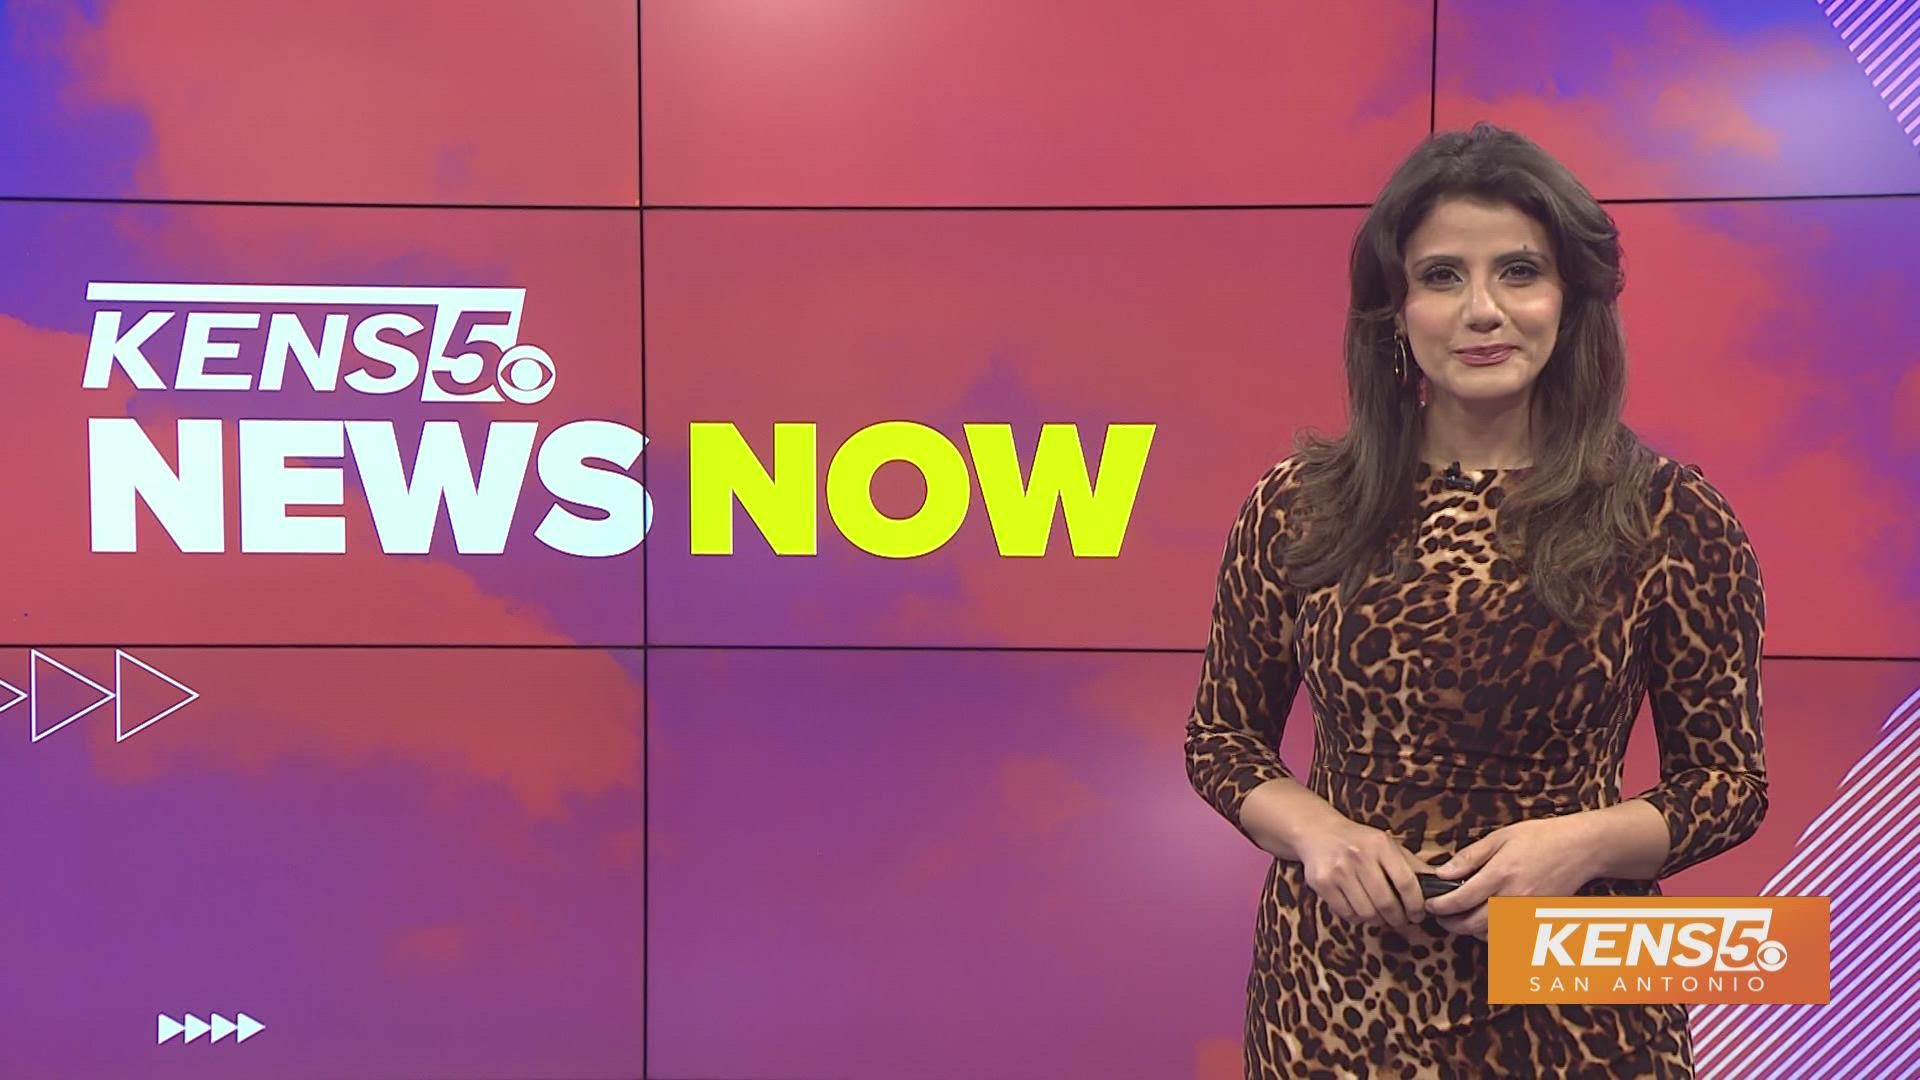 Follow us here to get the latest top headlines with KENS 5 anchor Sarah Forgany every weekday with KENS 5!